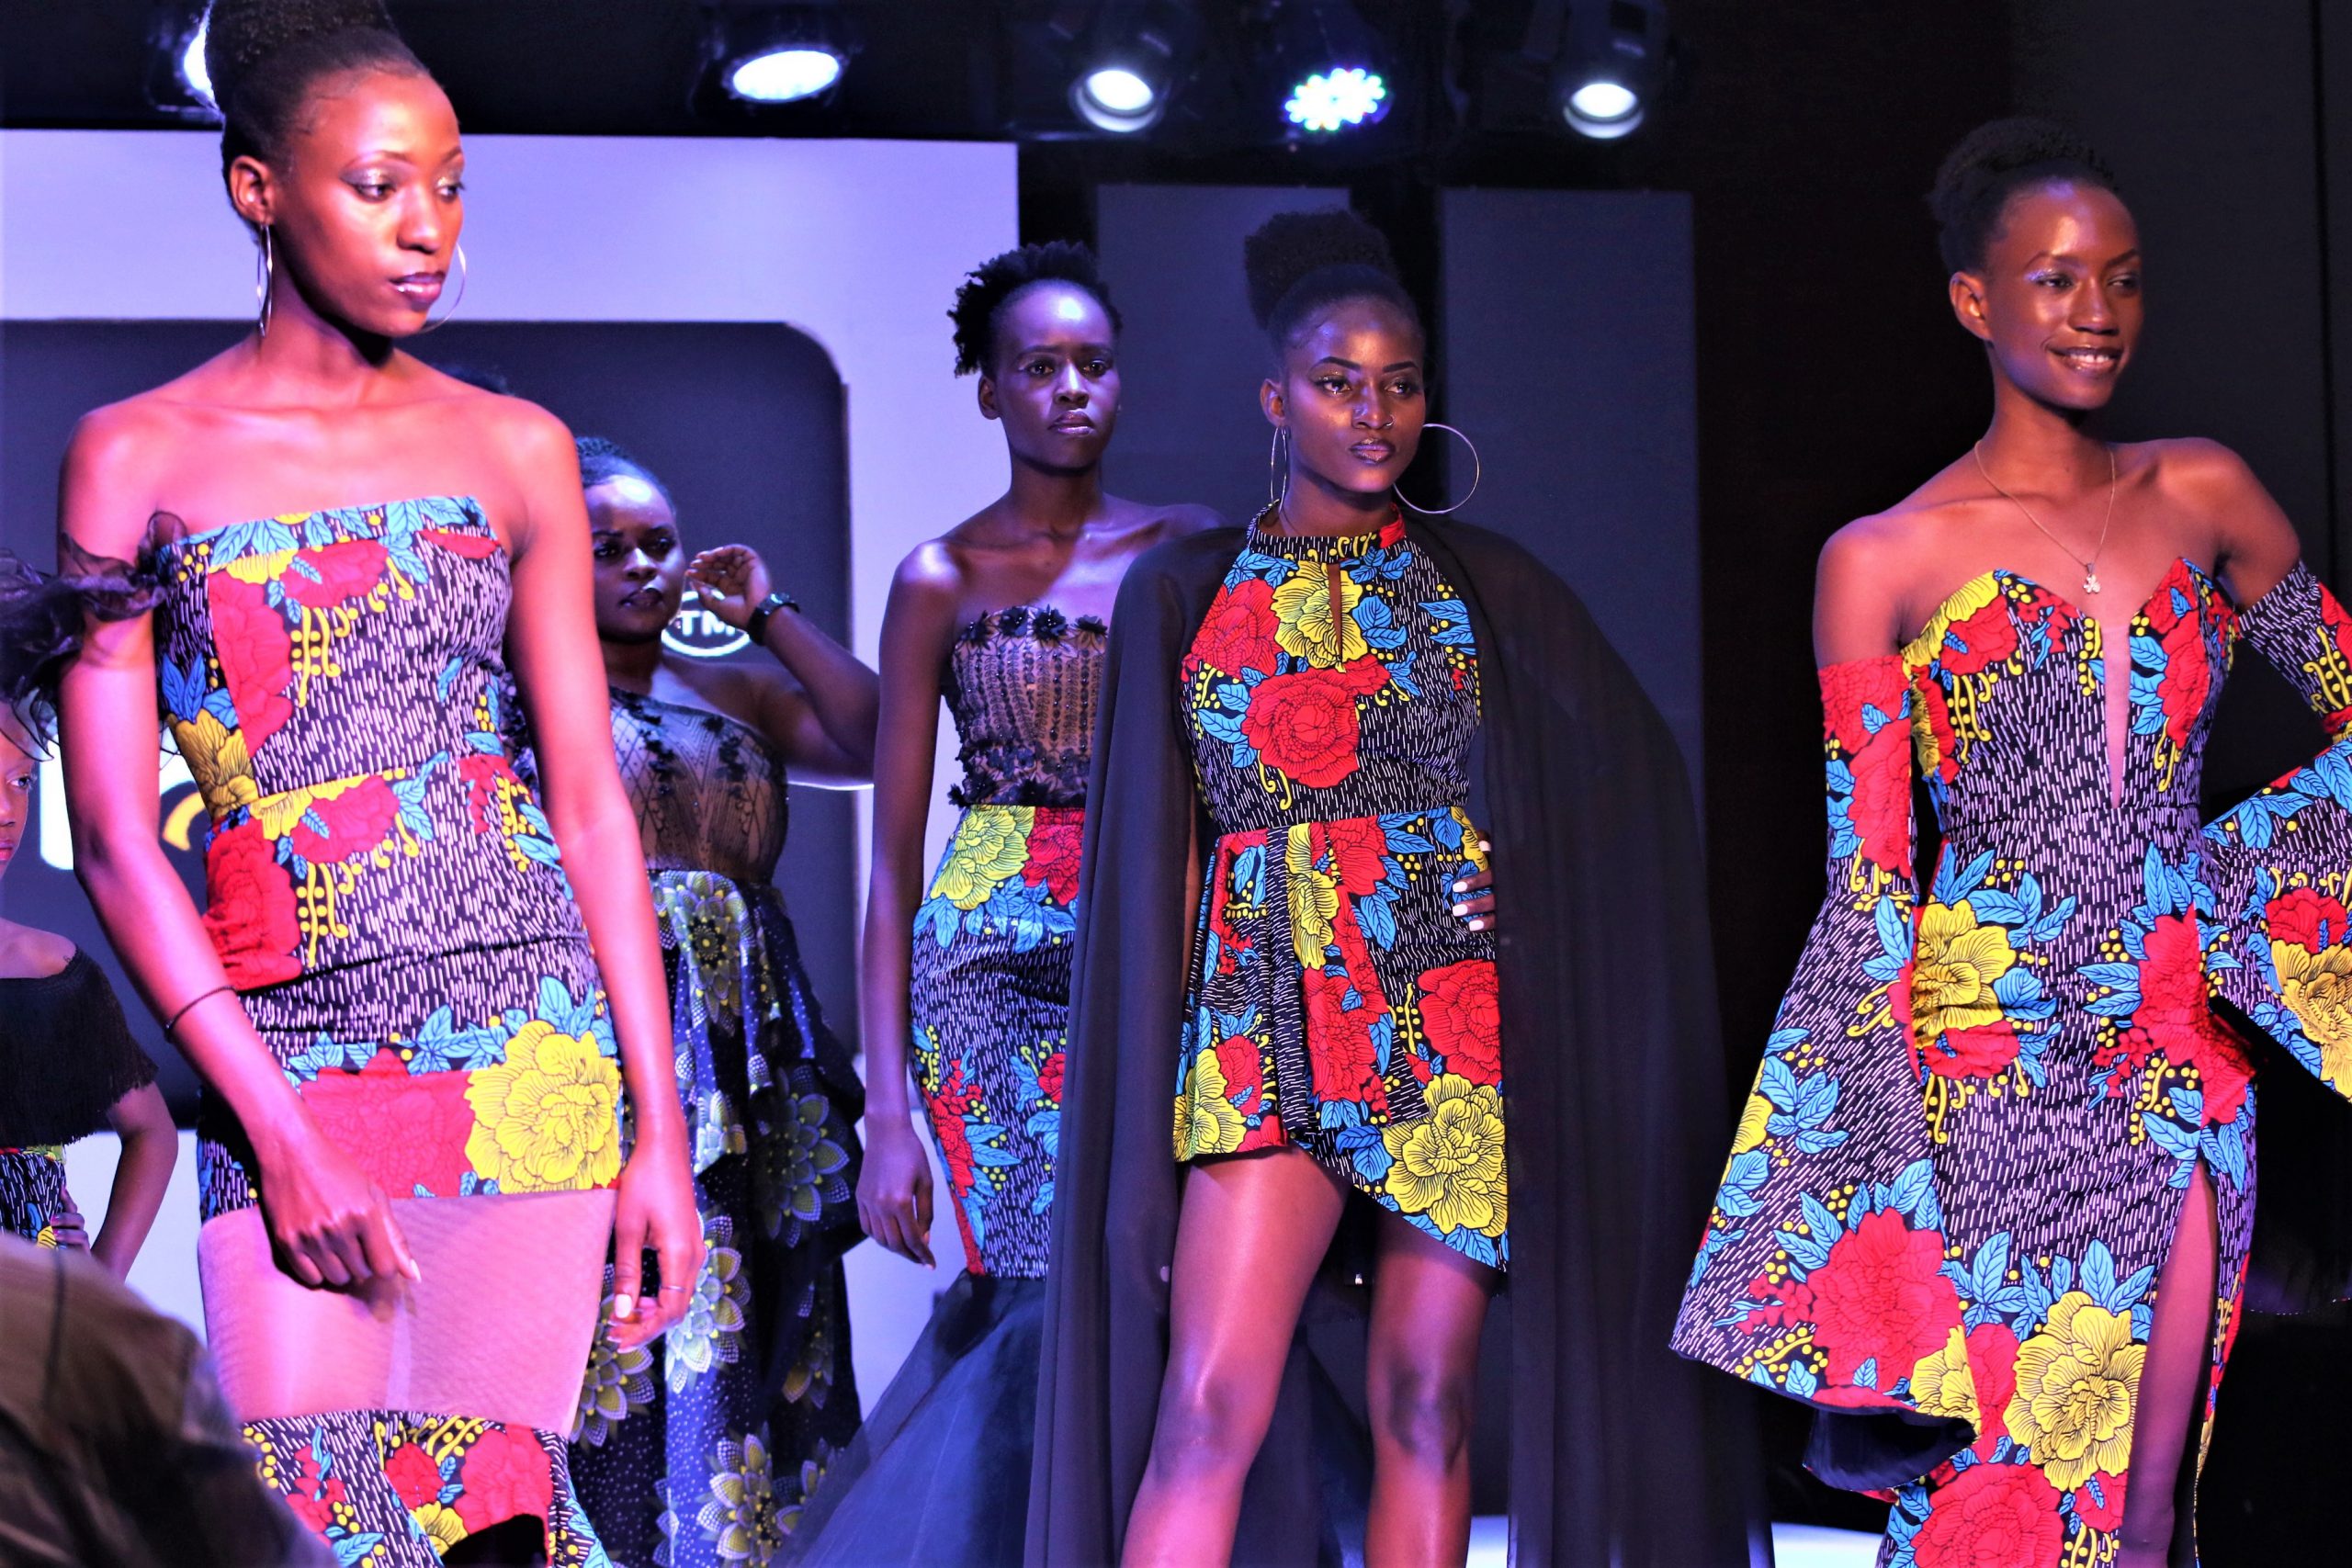 PHOTOS: Pomp at the Virtual Edition of Fashion Revolution Expo